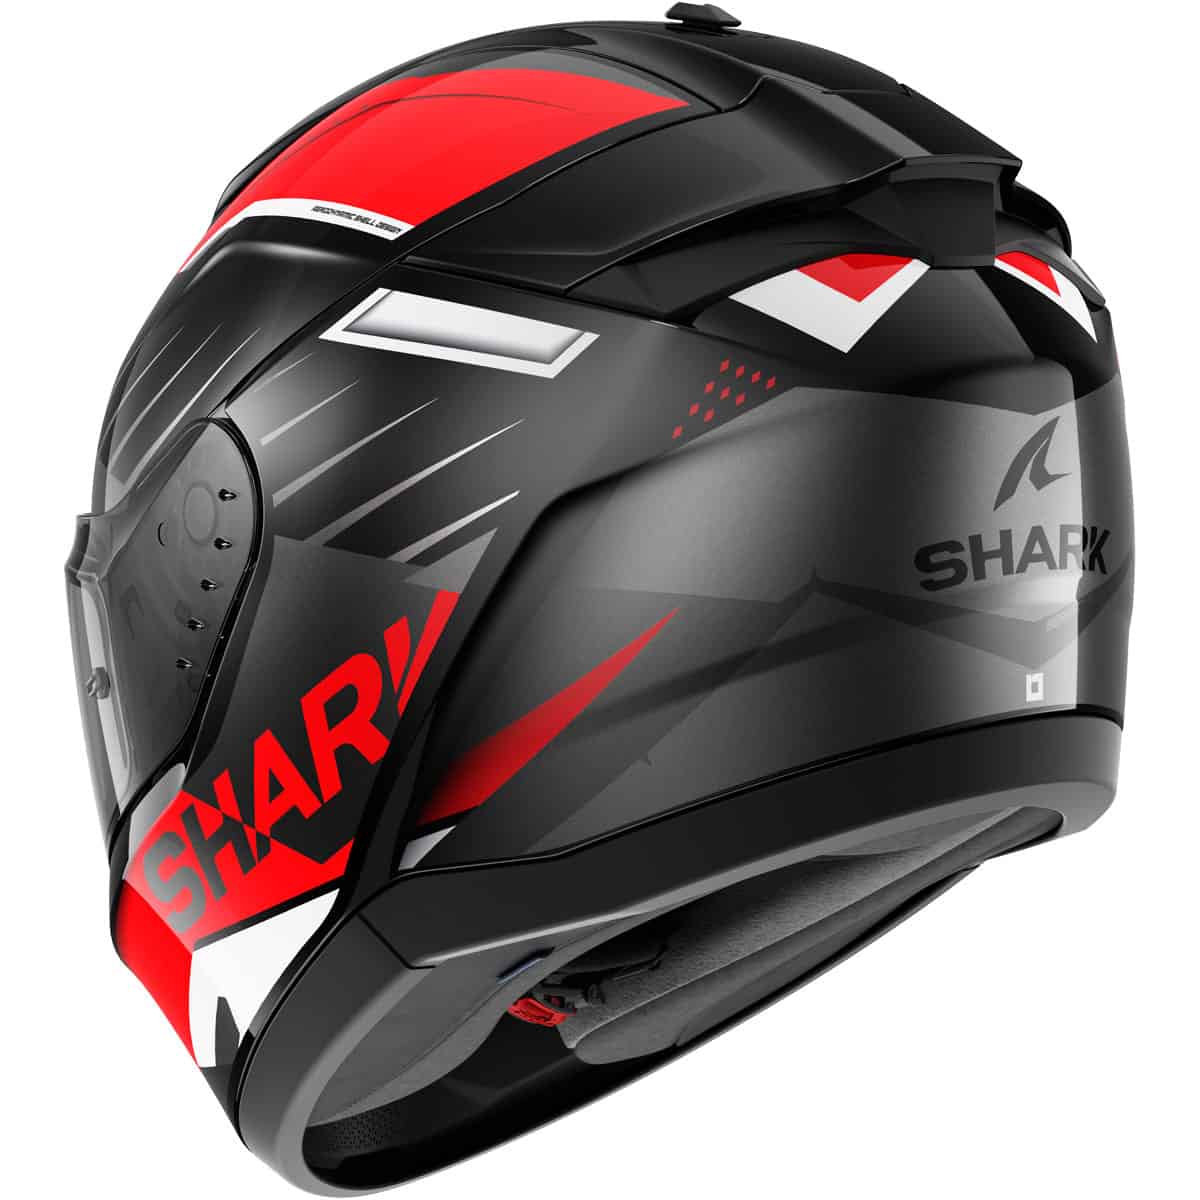 Experience a ride like no other with the Shark Ridill 2 Helmet. This helmet features an all-new design and exceptional features, combining streetwear look air inlets